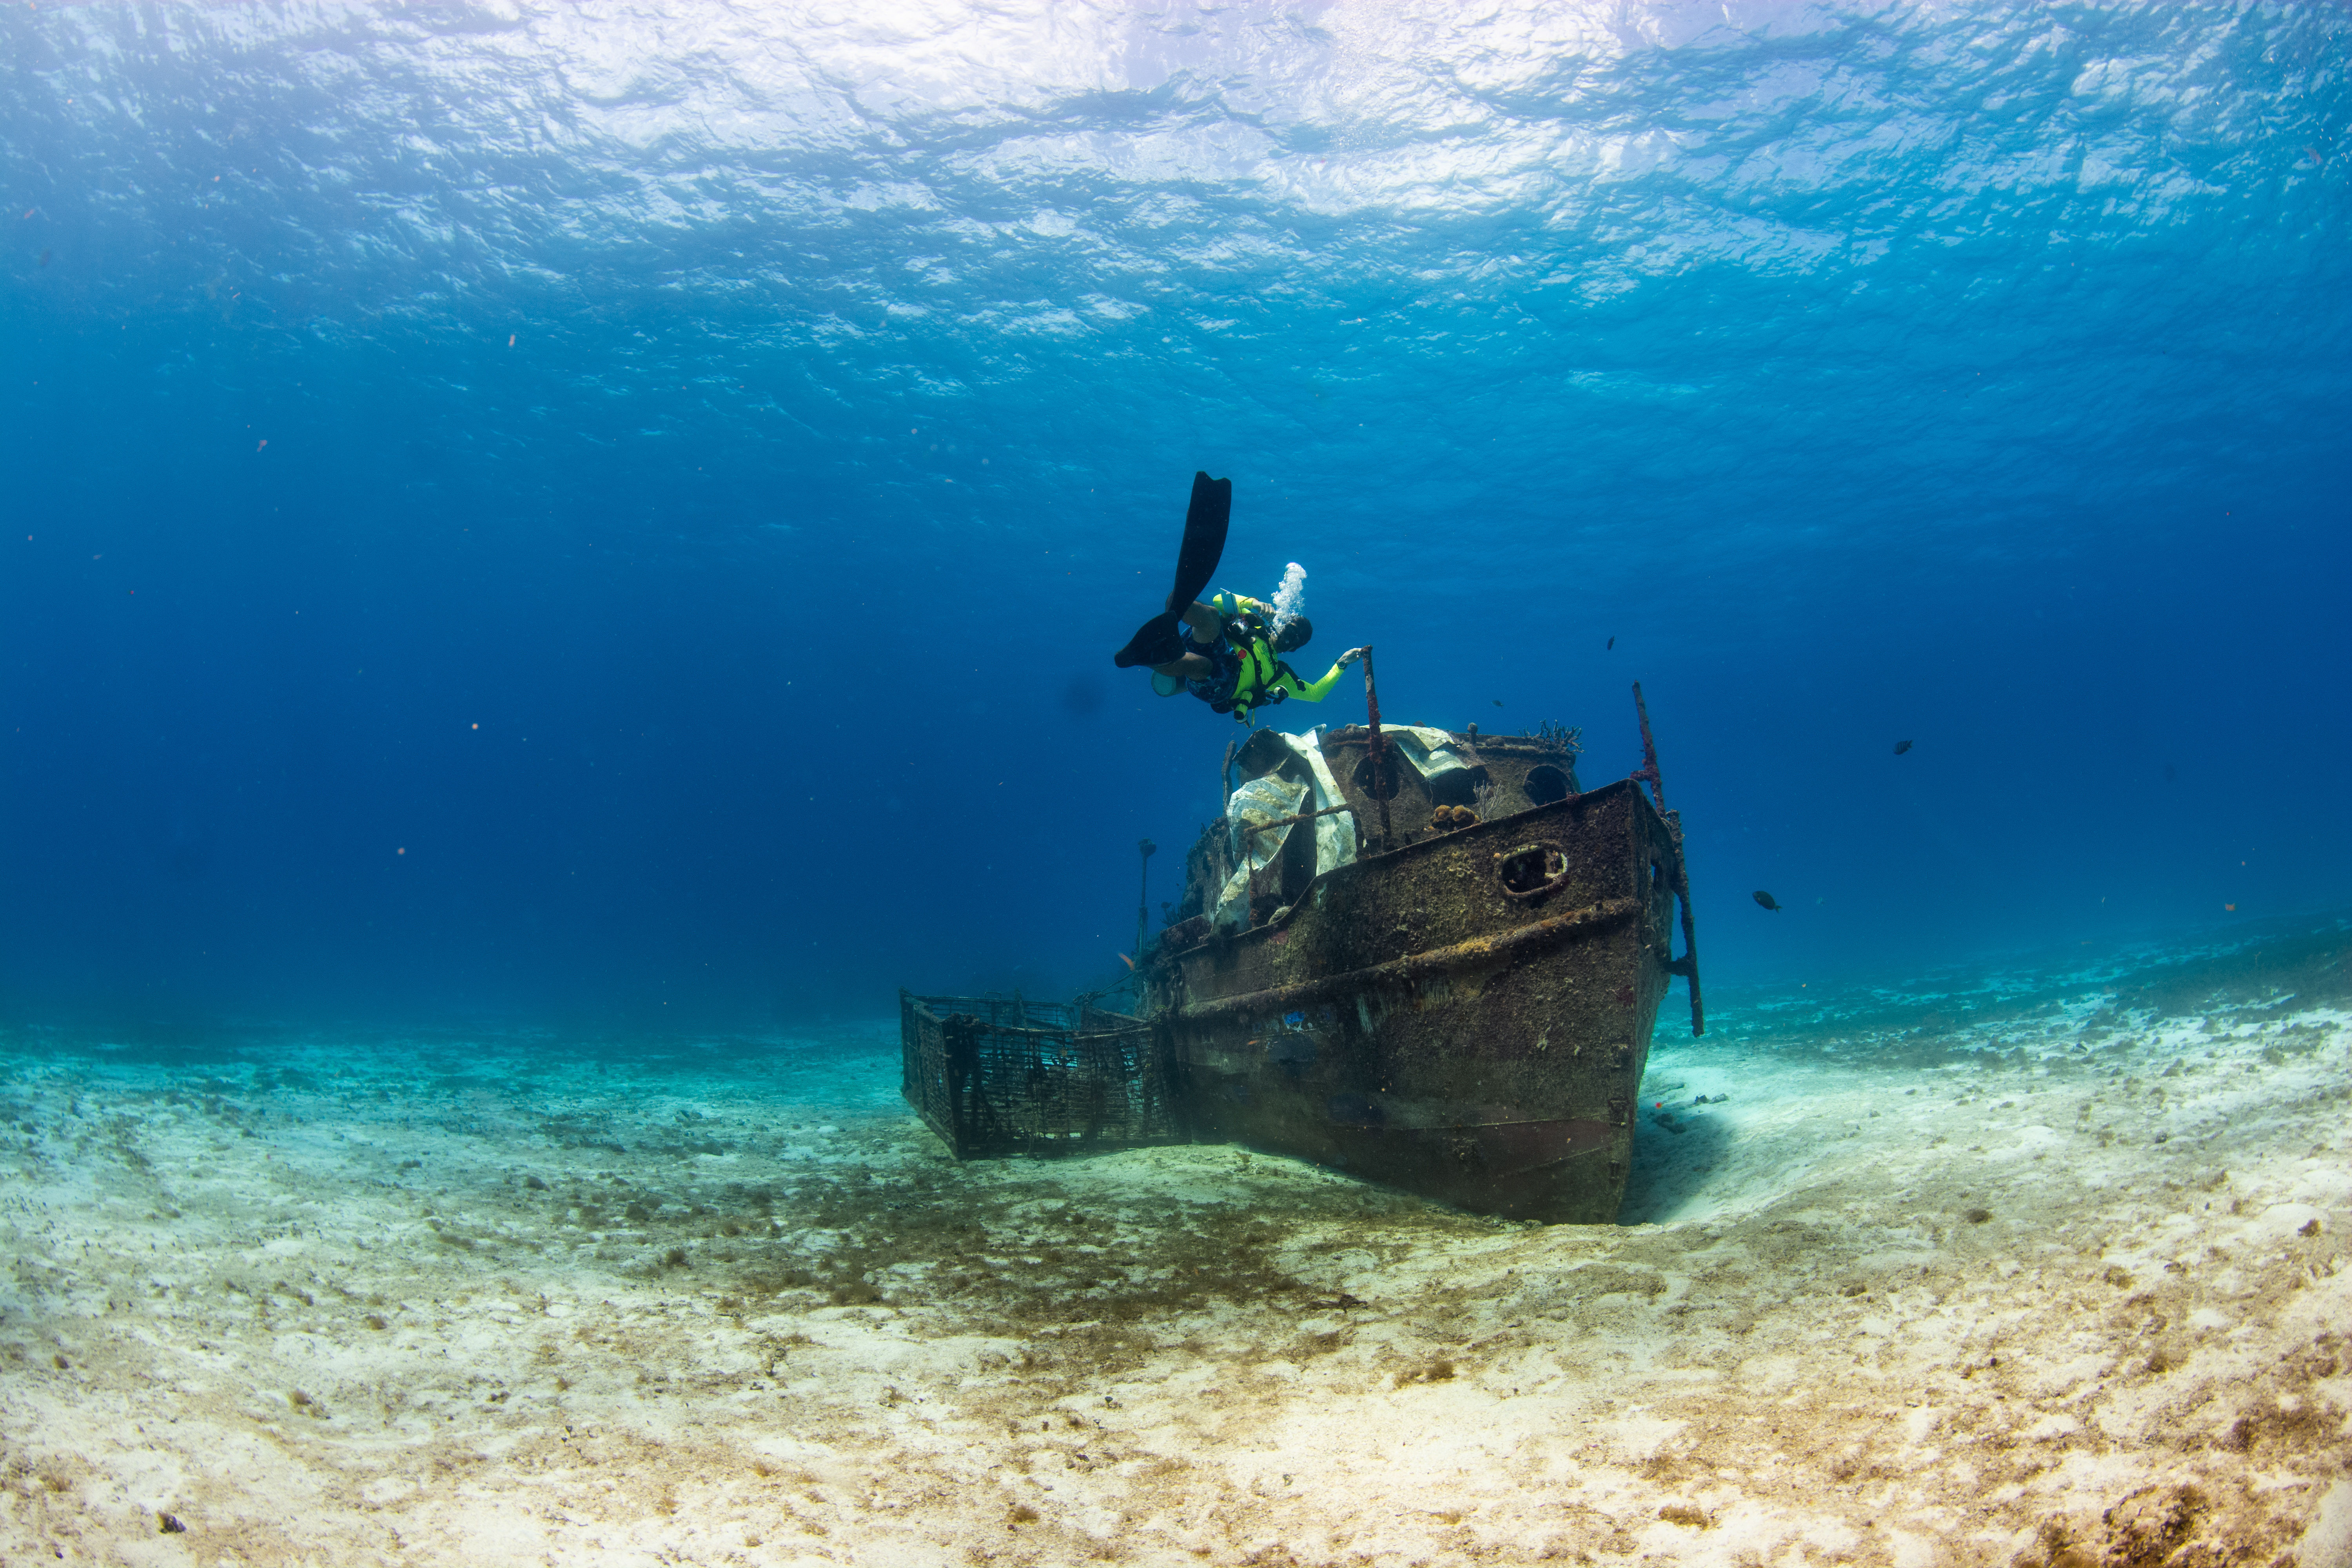 Diver next to small underwater wreck in Cozumel, Mexico.